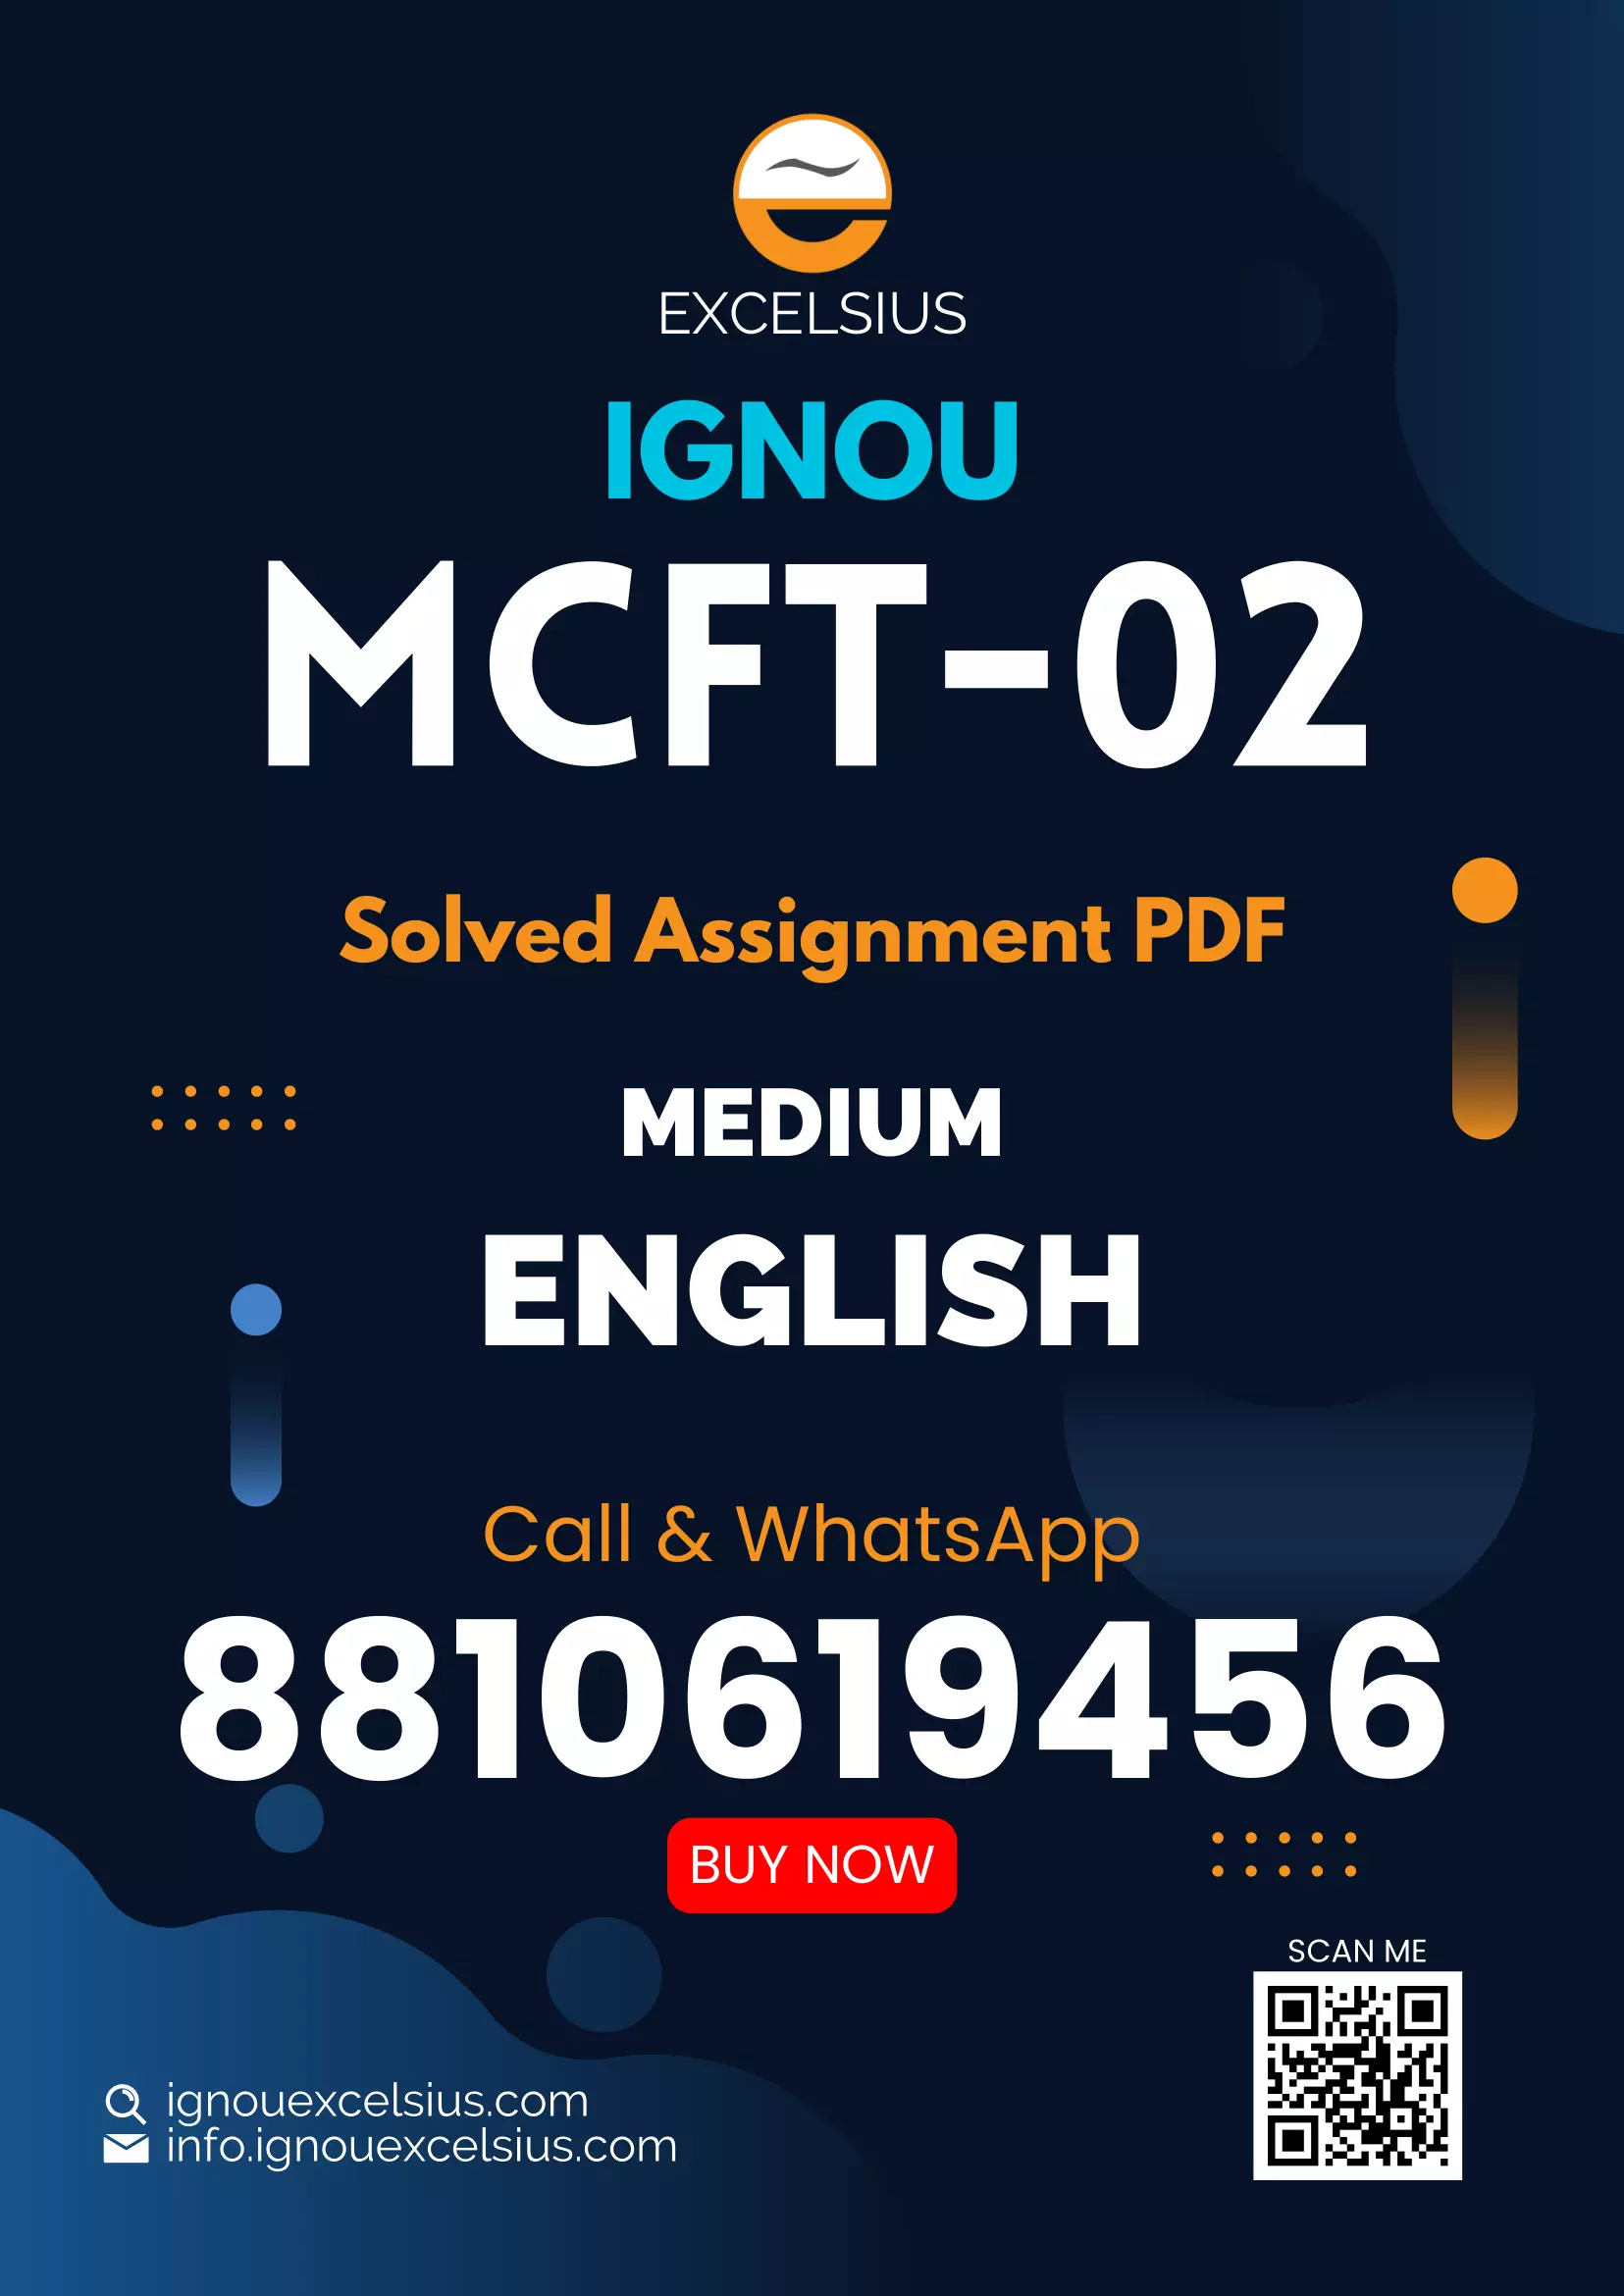 IGNOU MCFT-02 - Mental Health and Disorders, Latest Solved Assignment-July 2022 – January 2023